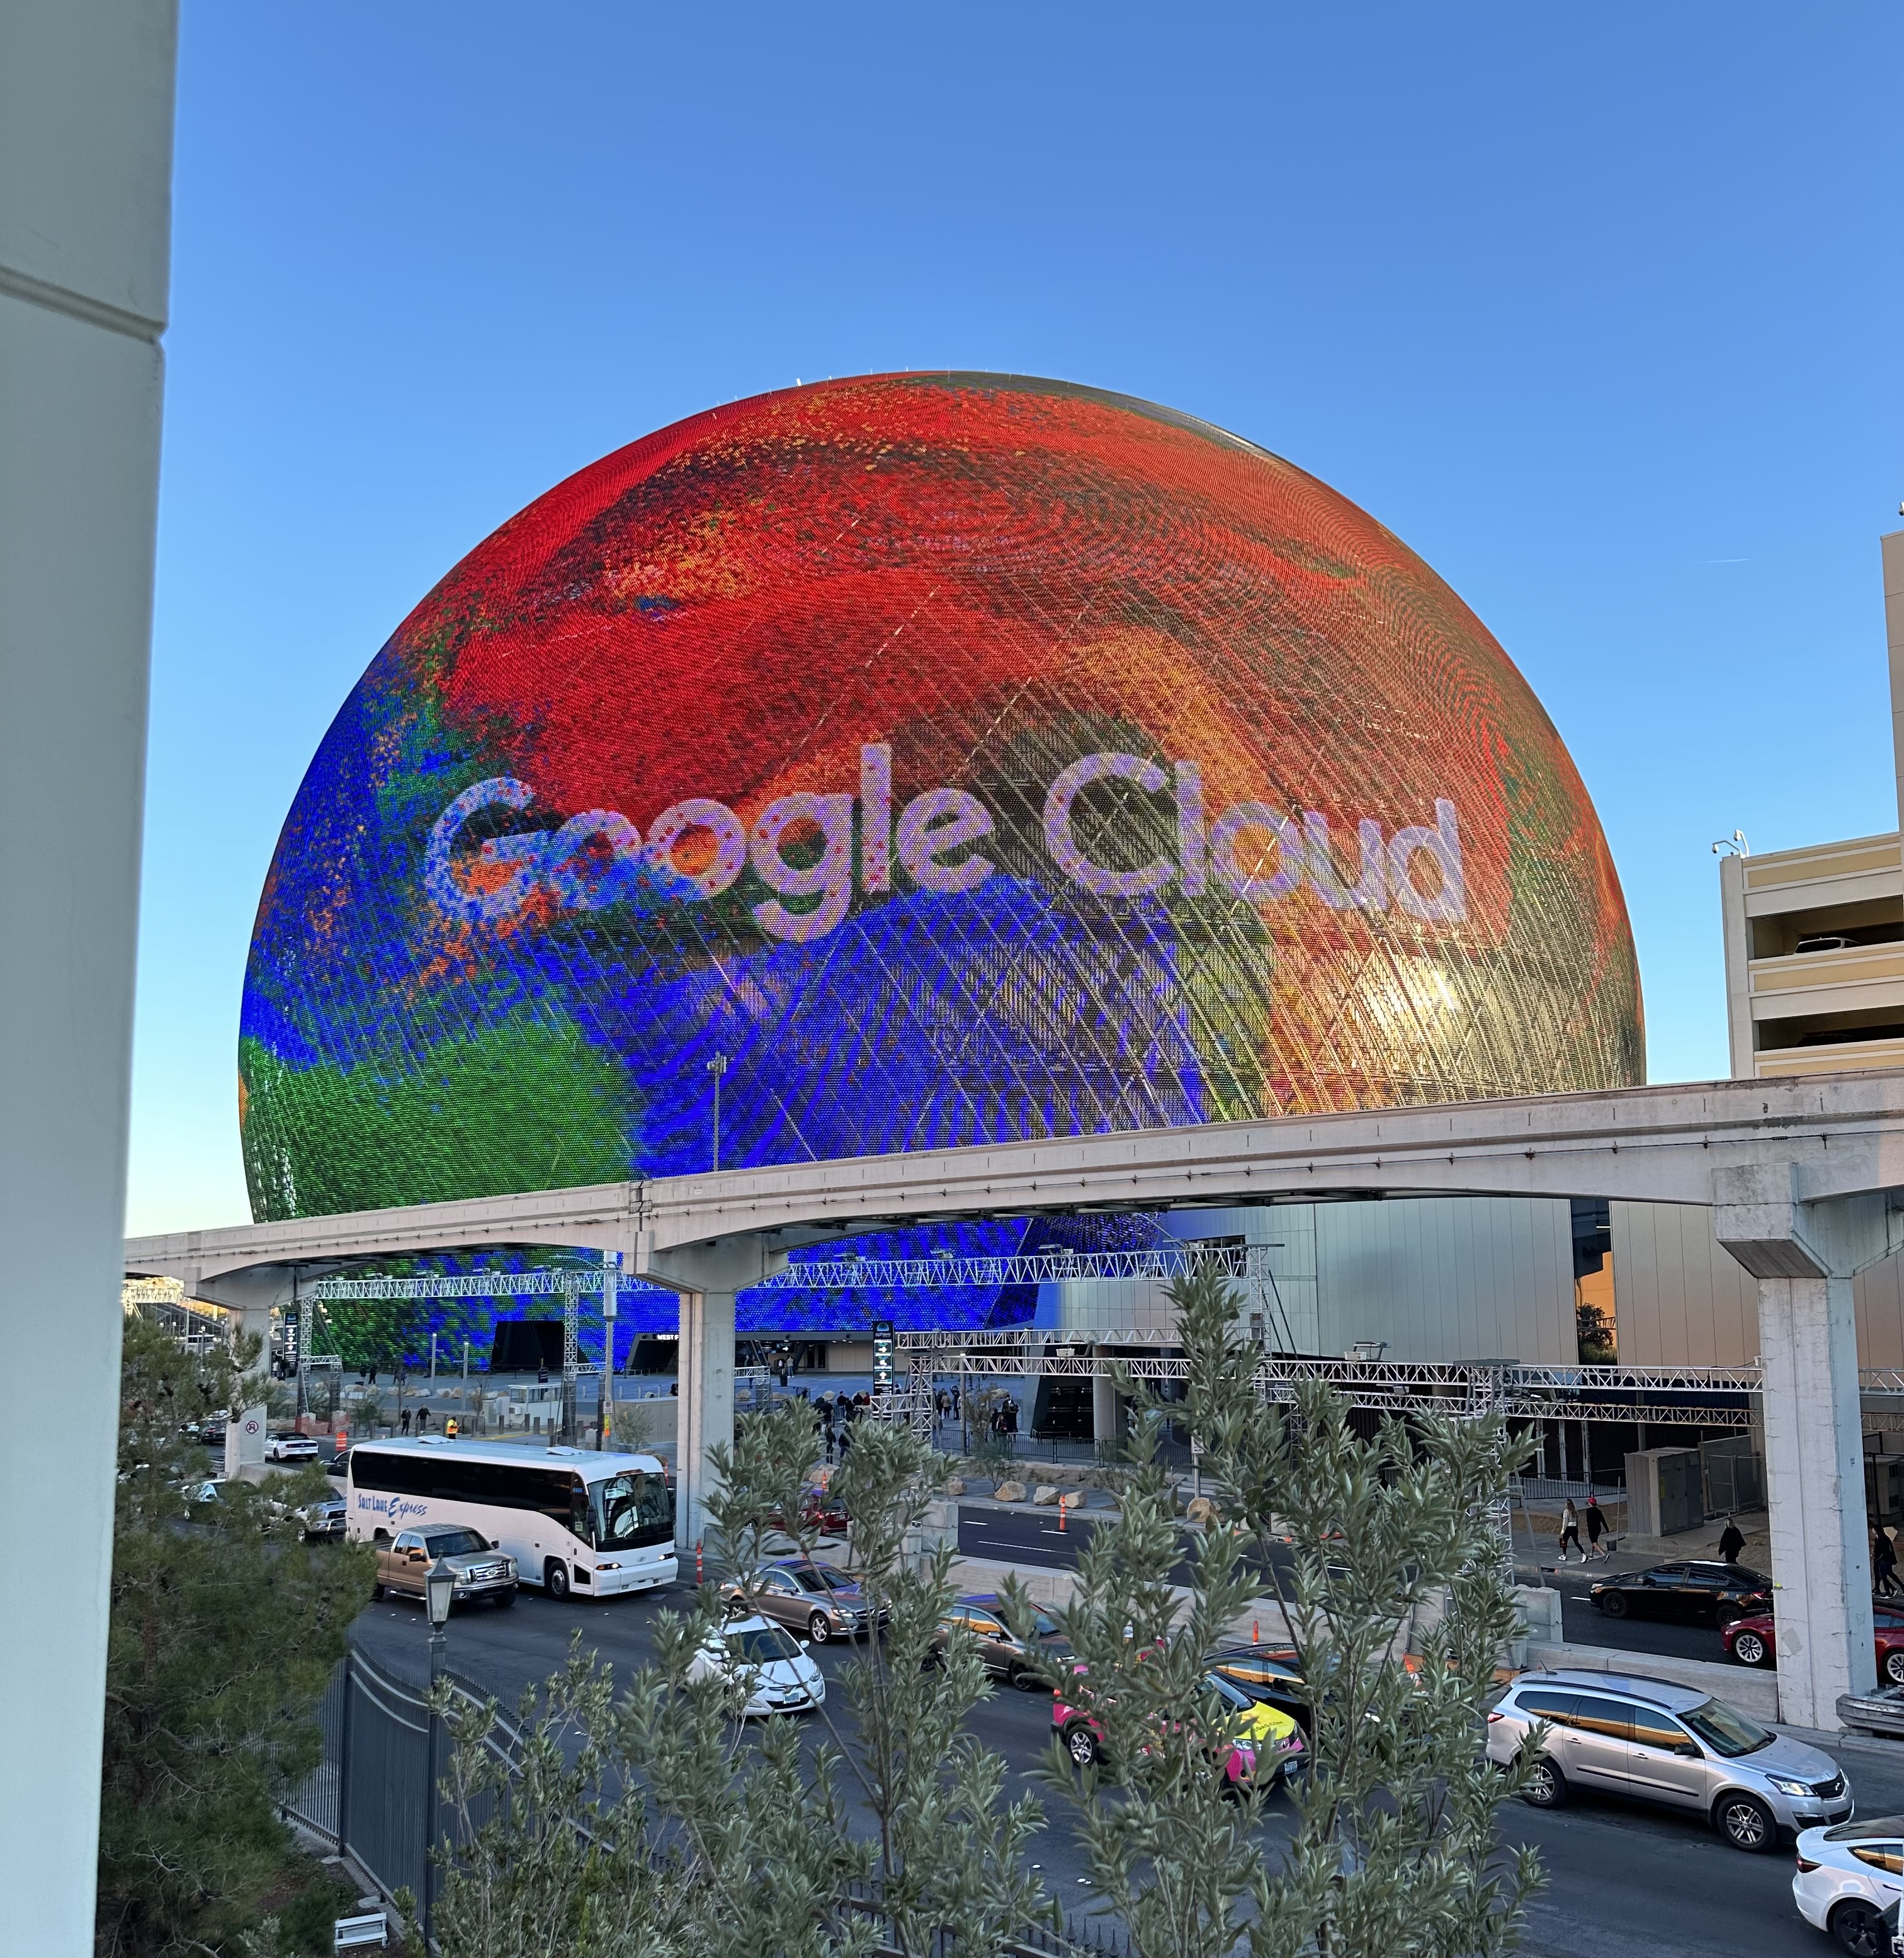 A troll masterpiece: Google has been advertising on the sphere for the duration of Reinvent